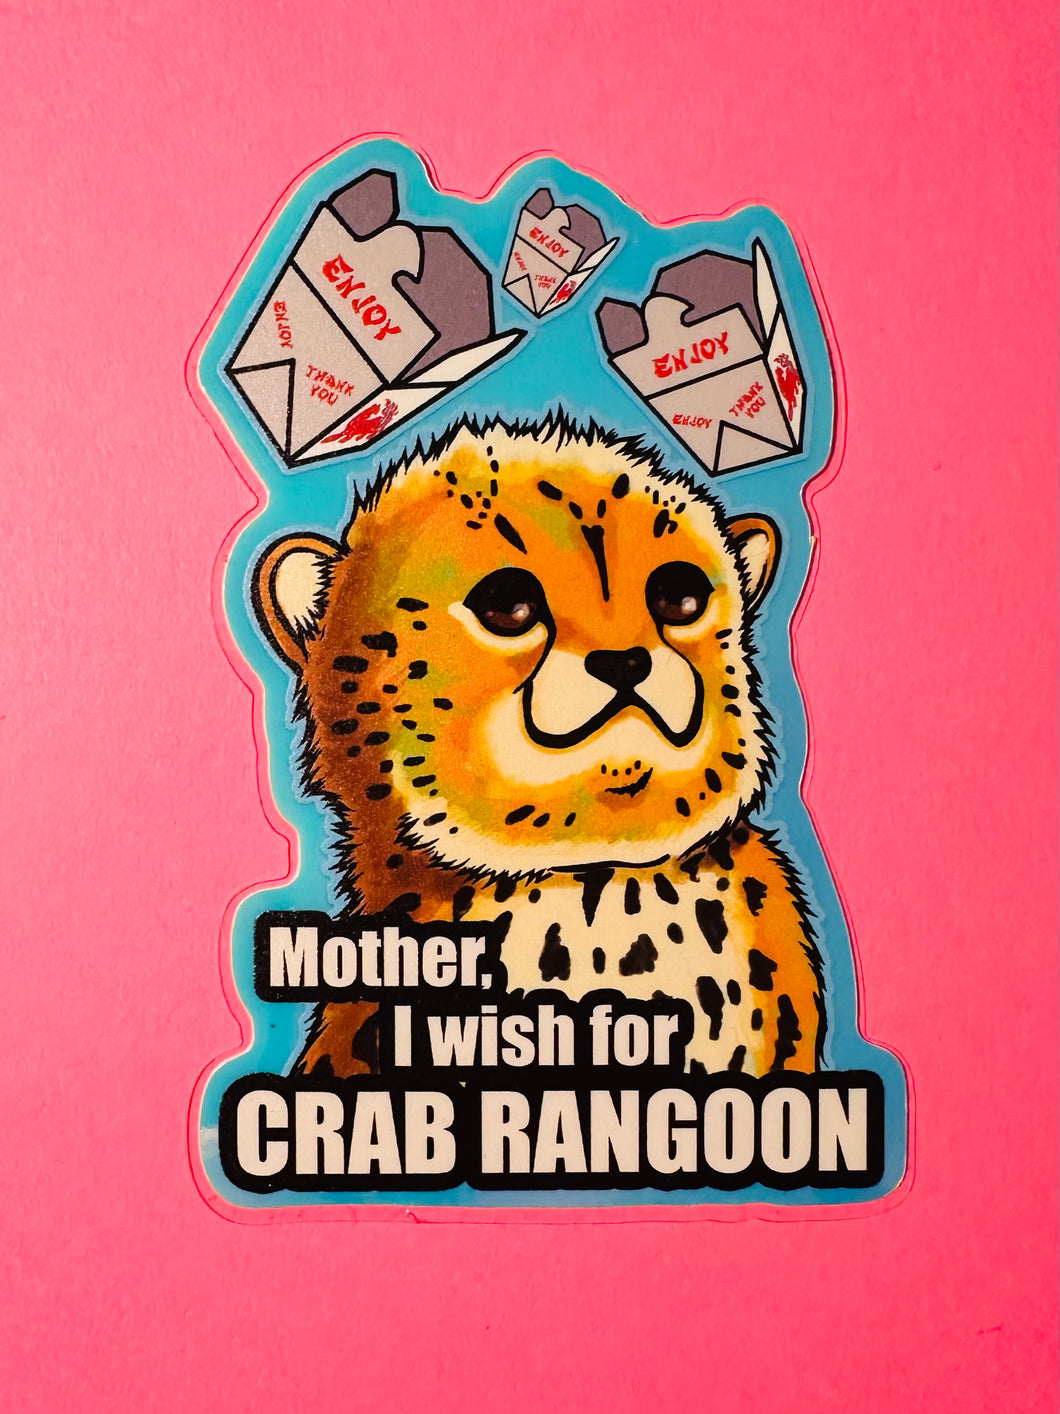 Glow in the dark sticker! Holographic edges! 4 inch! Mother, I wish for Crab Rangoon! Baby cheetah!